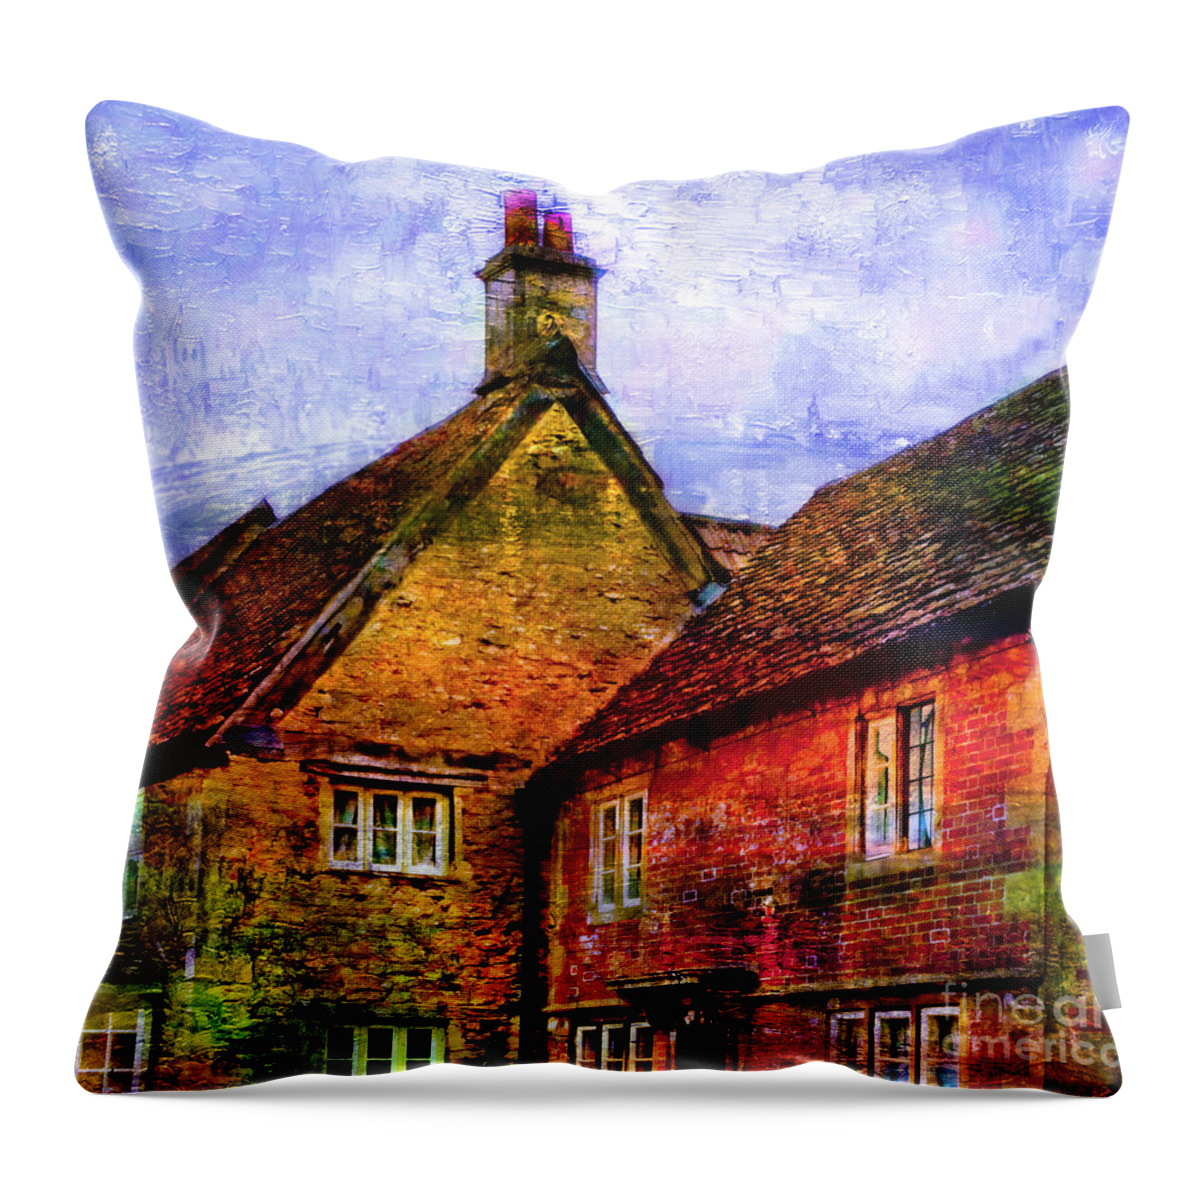 Lacock Throw Pillow featuring the photograph Lacock Village, Wiltshire by Judi Bagwell